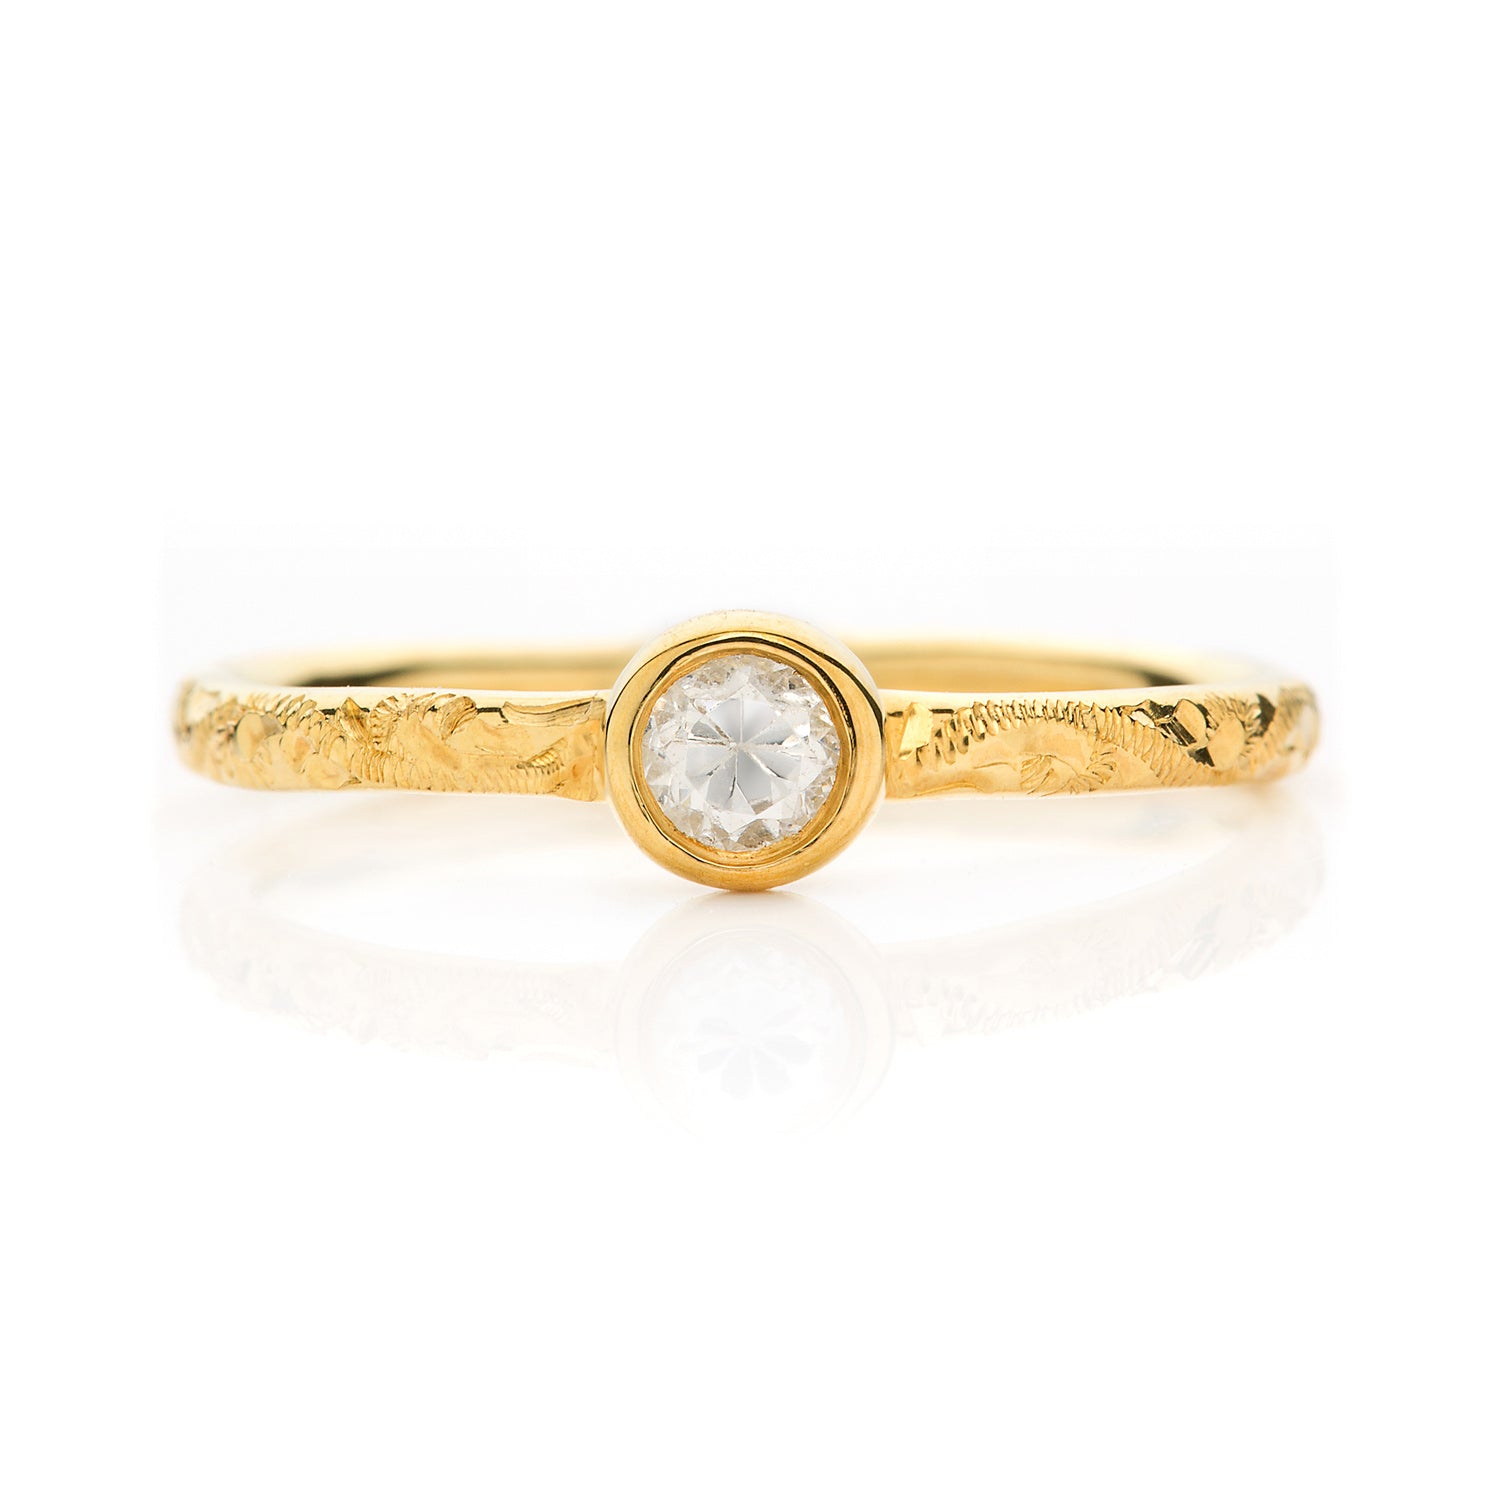 Ready to wear Hera Ethical Diamond Engagement Ring, Gold